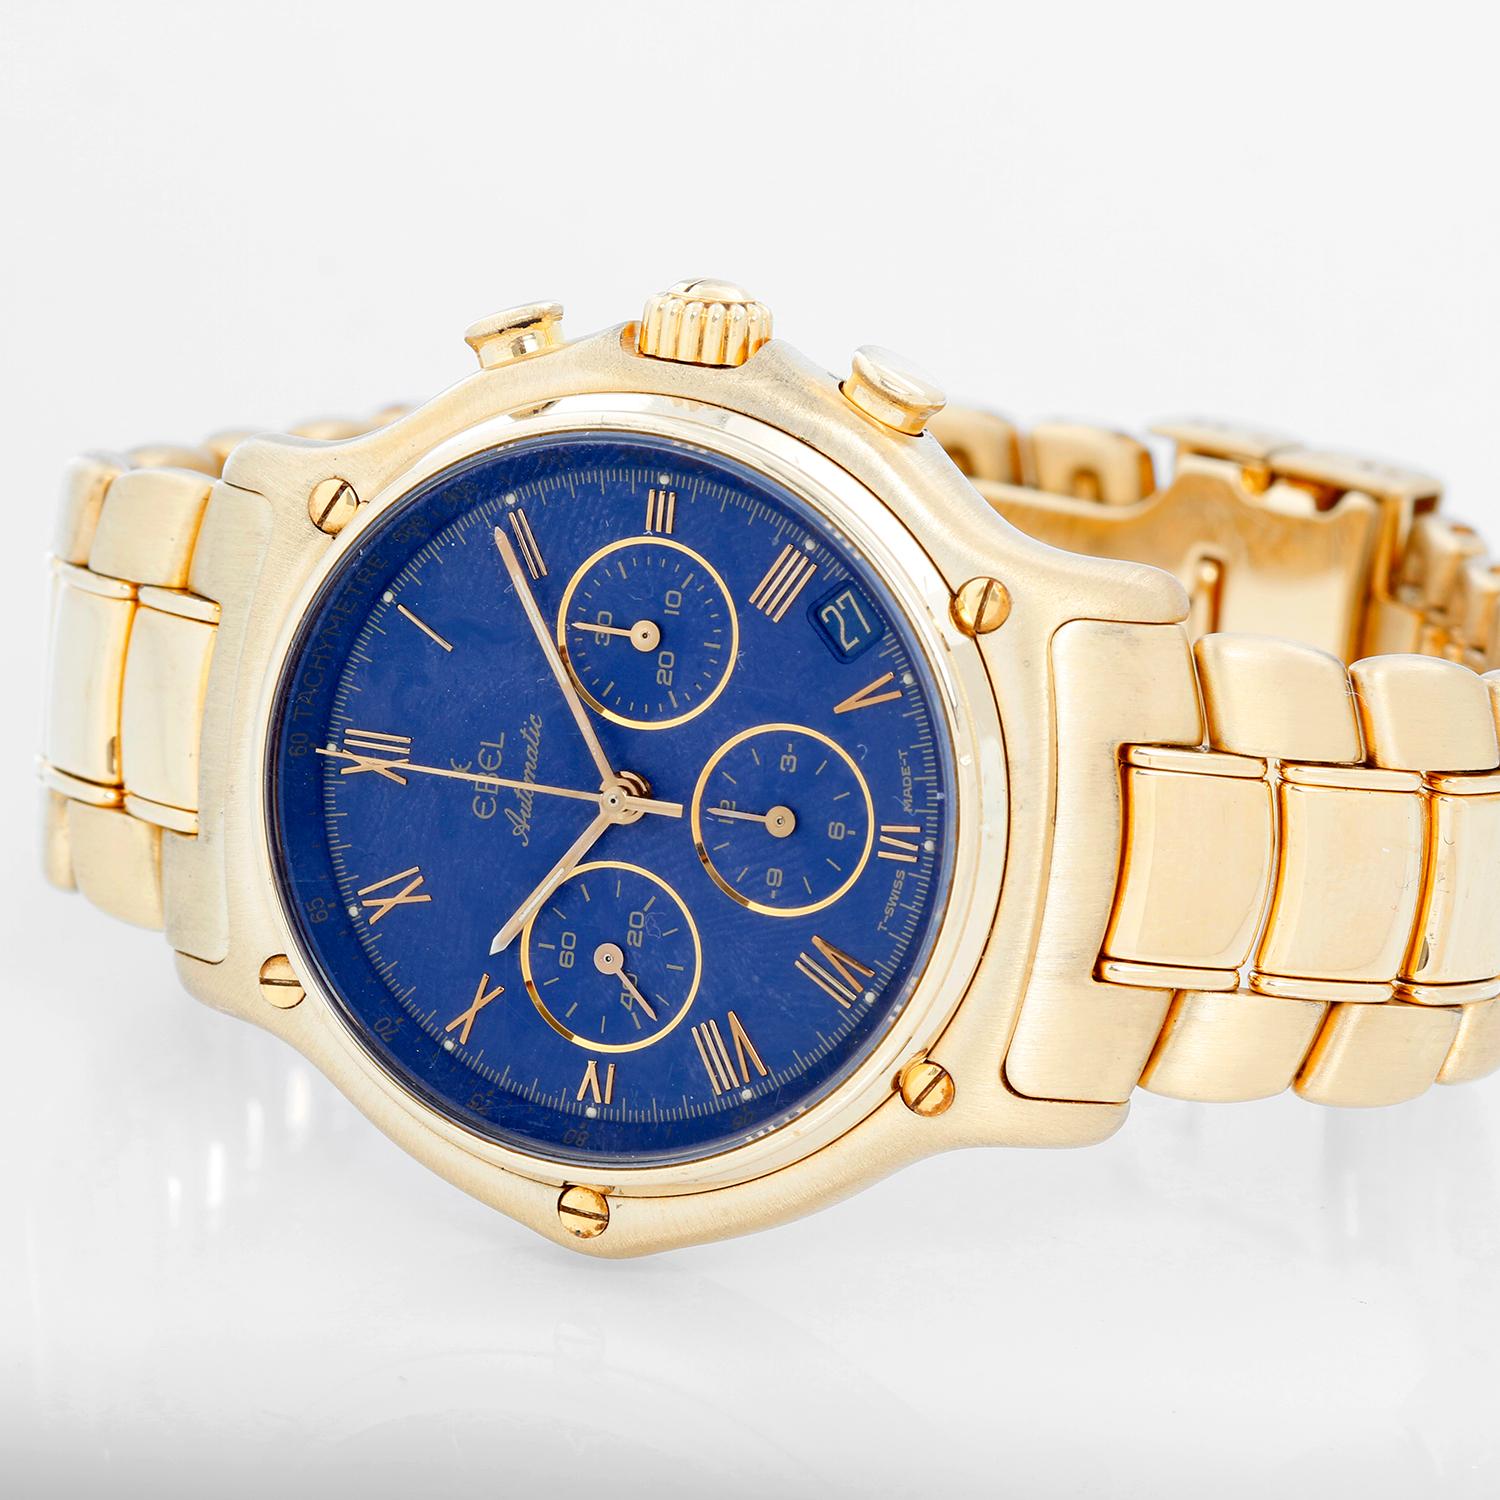 Ebel Chronograph 1911 Men's 18k Yellow Gold Automatic Watch - Automatic winding with date. 18k yellow gold case (38 mm). Blue dial with gold Arabic numerals, 3 blue sub-dials; date between 4 & 5 o'clock. 18k yellow gold Ebel bracelet. Pre-owned with